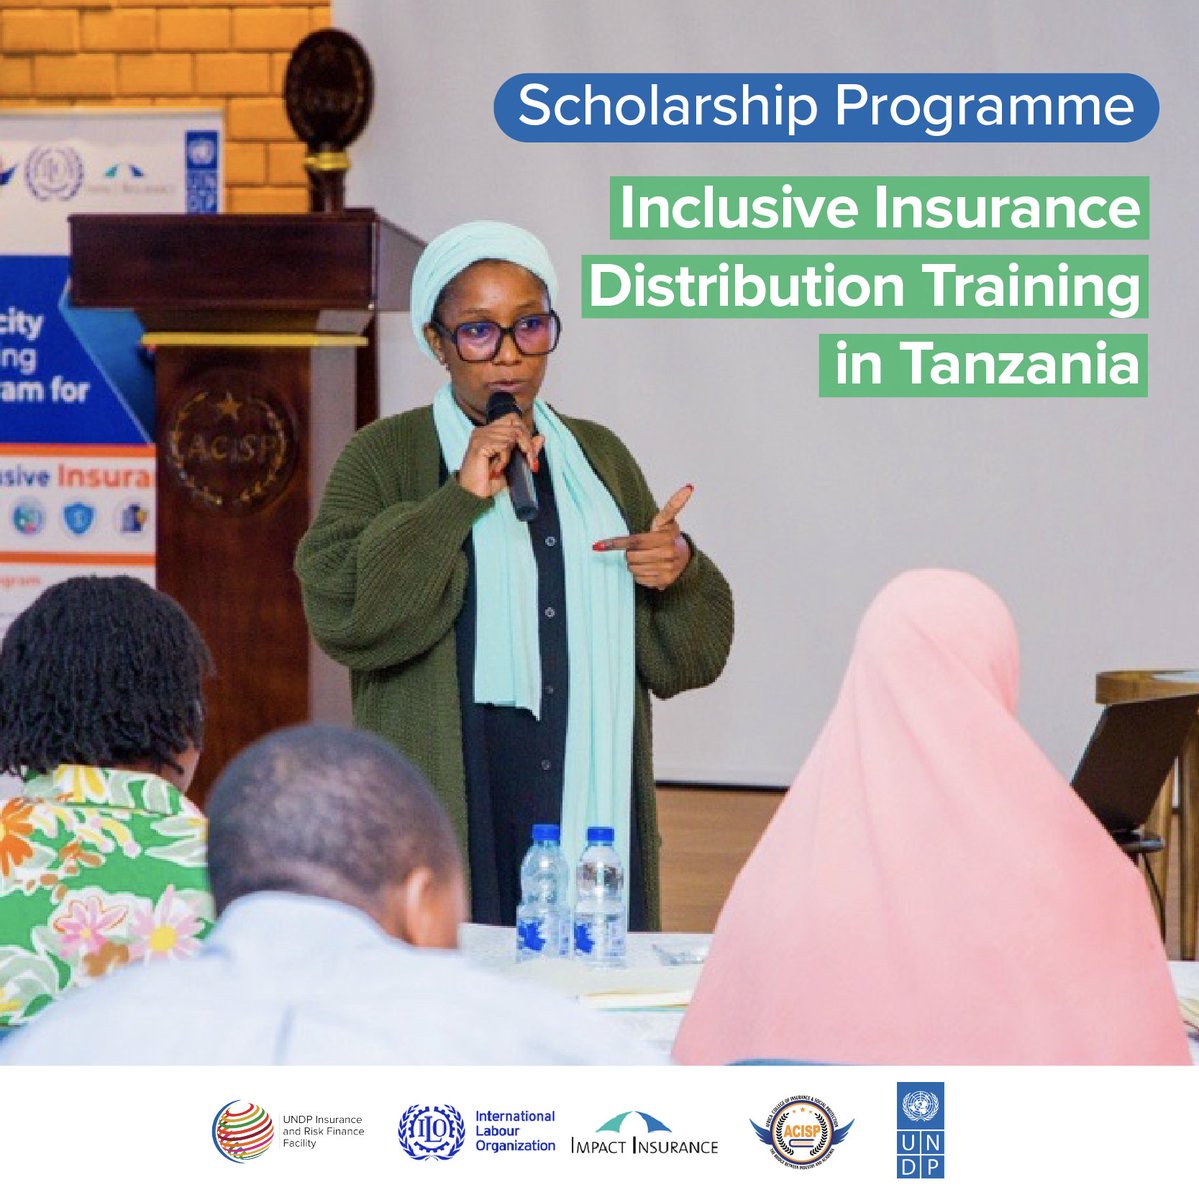 Scholarship opportunity for insurance practitioners committed to promoting #inclusiveinsurance in Tanzania! @UNDP will cover 50% of the Inclusive Insurance Distribution Training Program Deadline to apply 🗓️ Friday, May 17, 23:59 EAT Read more ⬇️ irff.undp.org/article/schola…